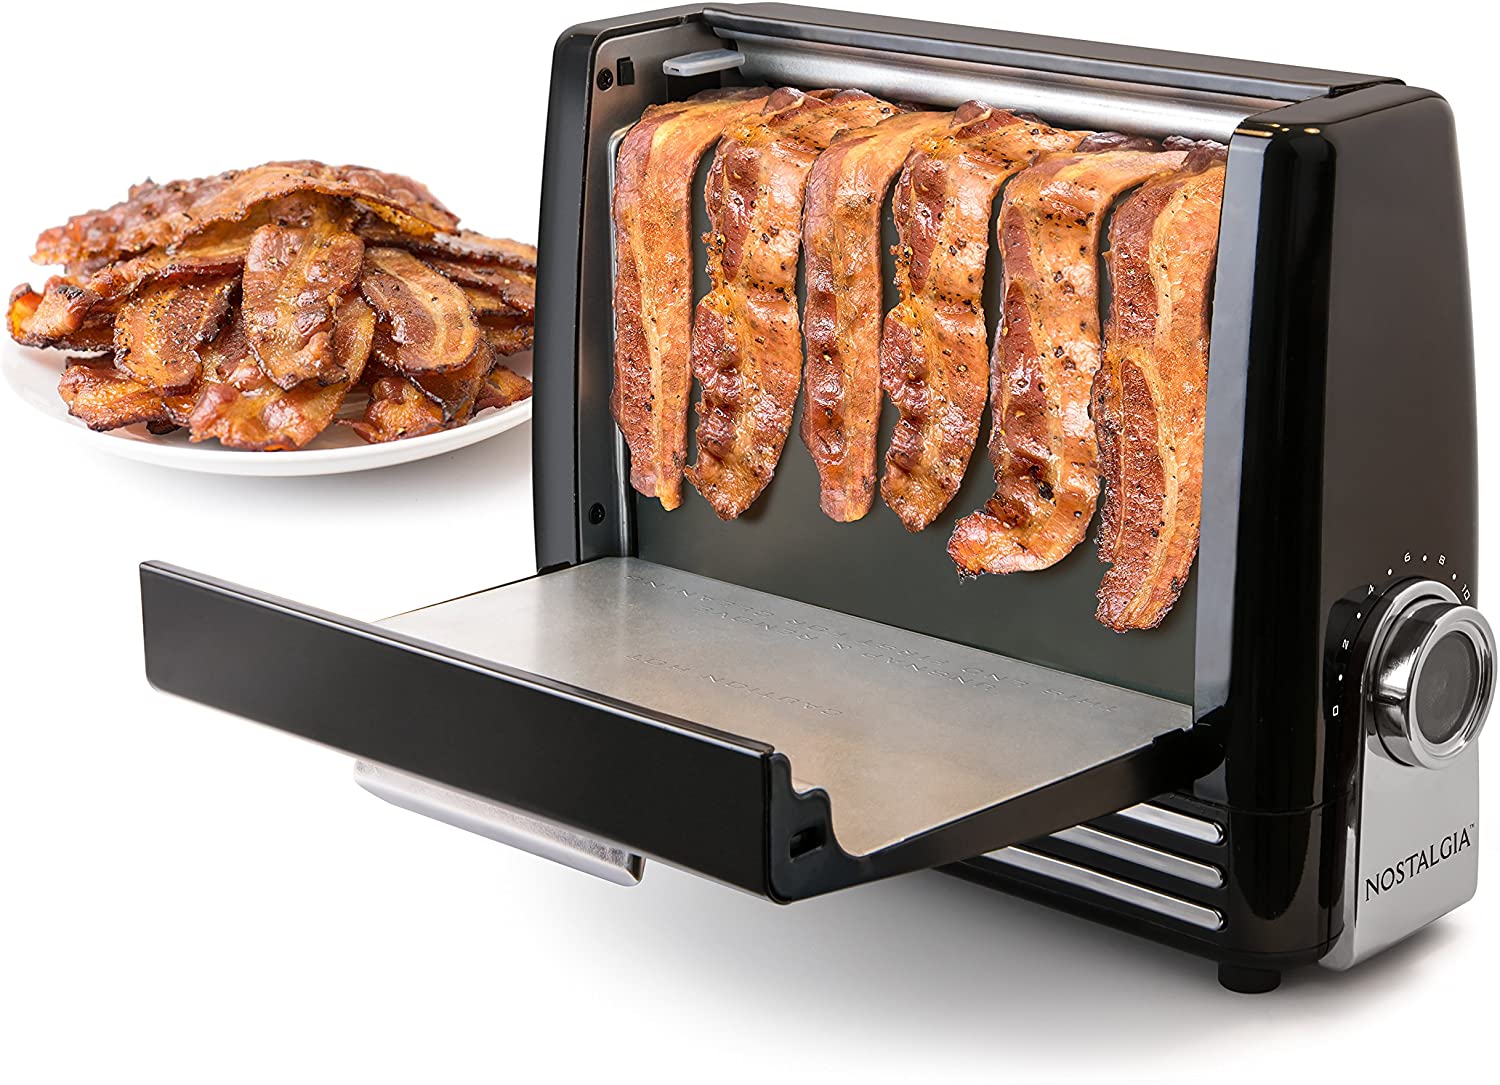 Bacon toaster - weird gifts for dad